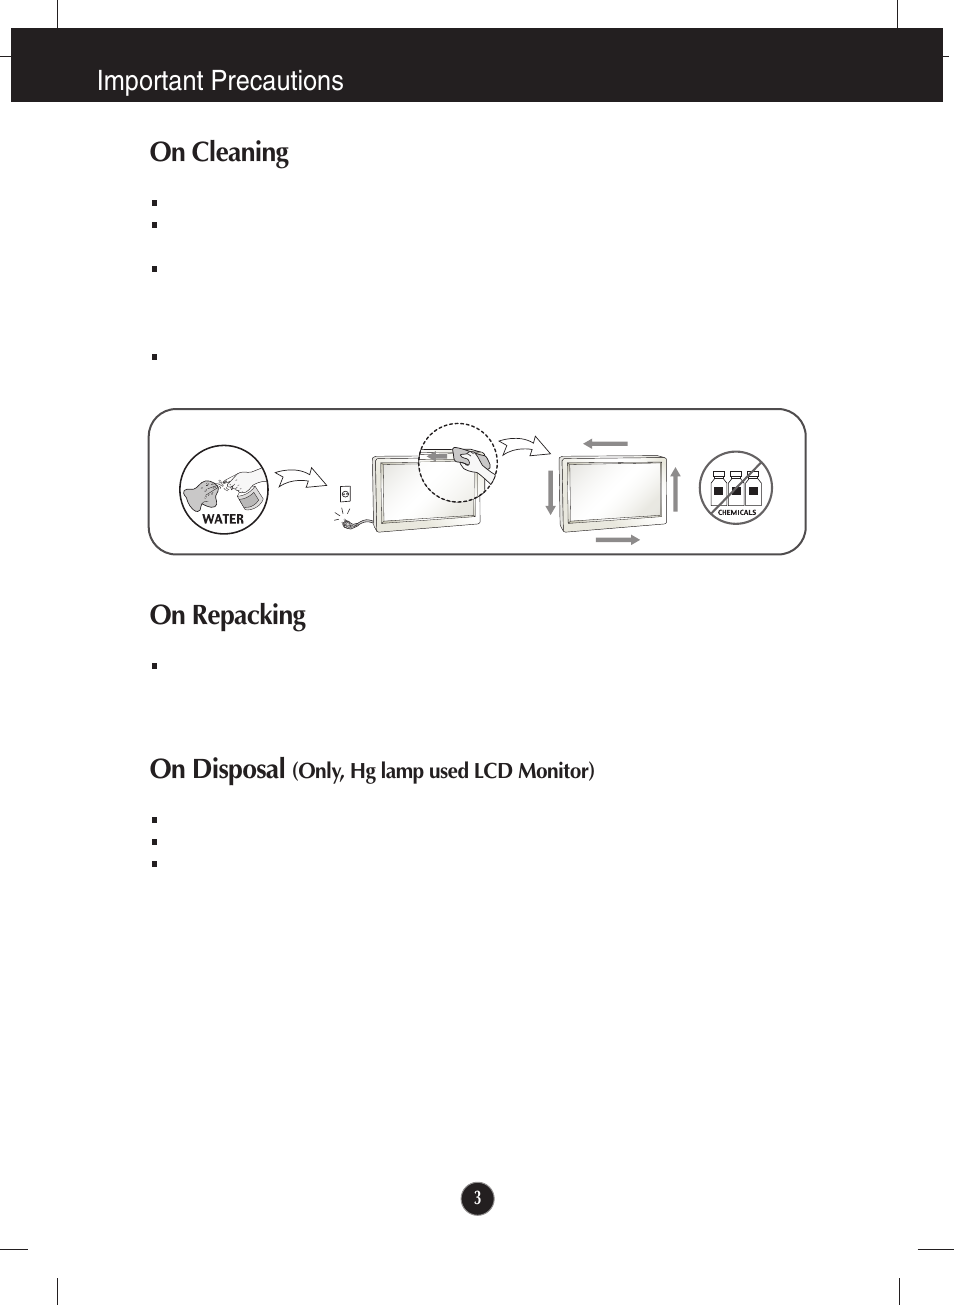 On cleaning, On repacking, On disposal (only, hg lamp used lcd monitor) | Important precautions, On disposal | LG W2043SE-PF User Manual | Page 4 / 34